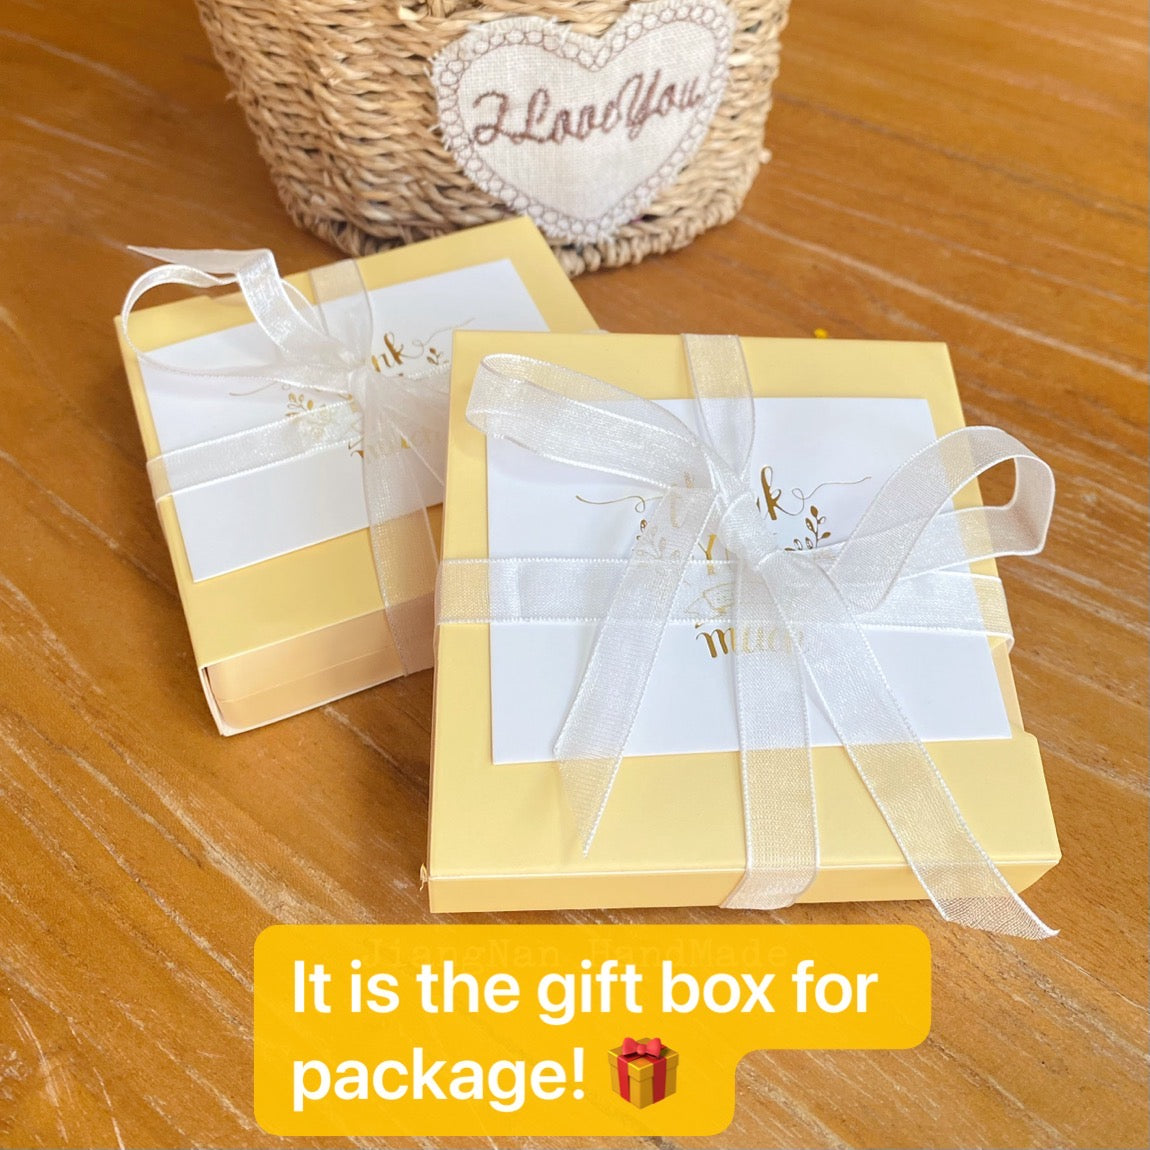 Gift box for package